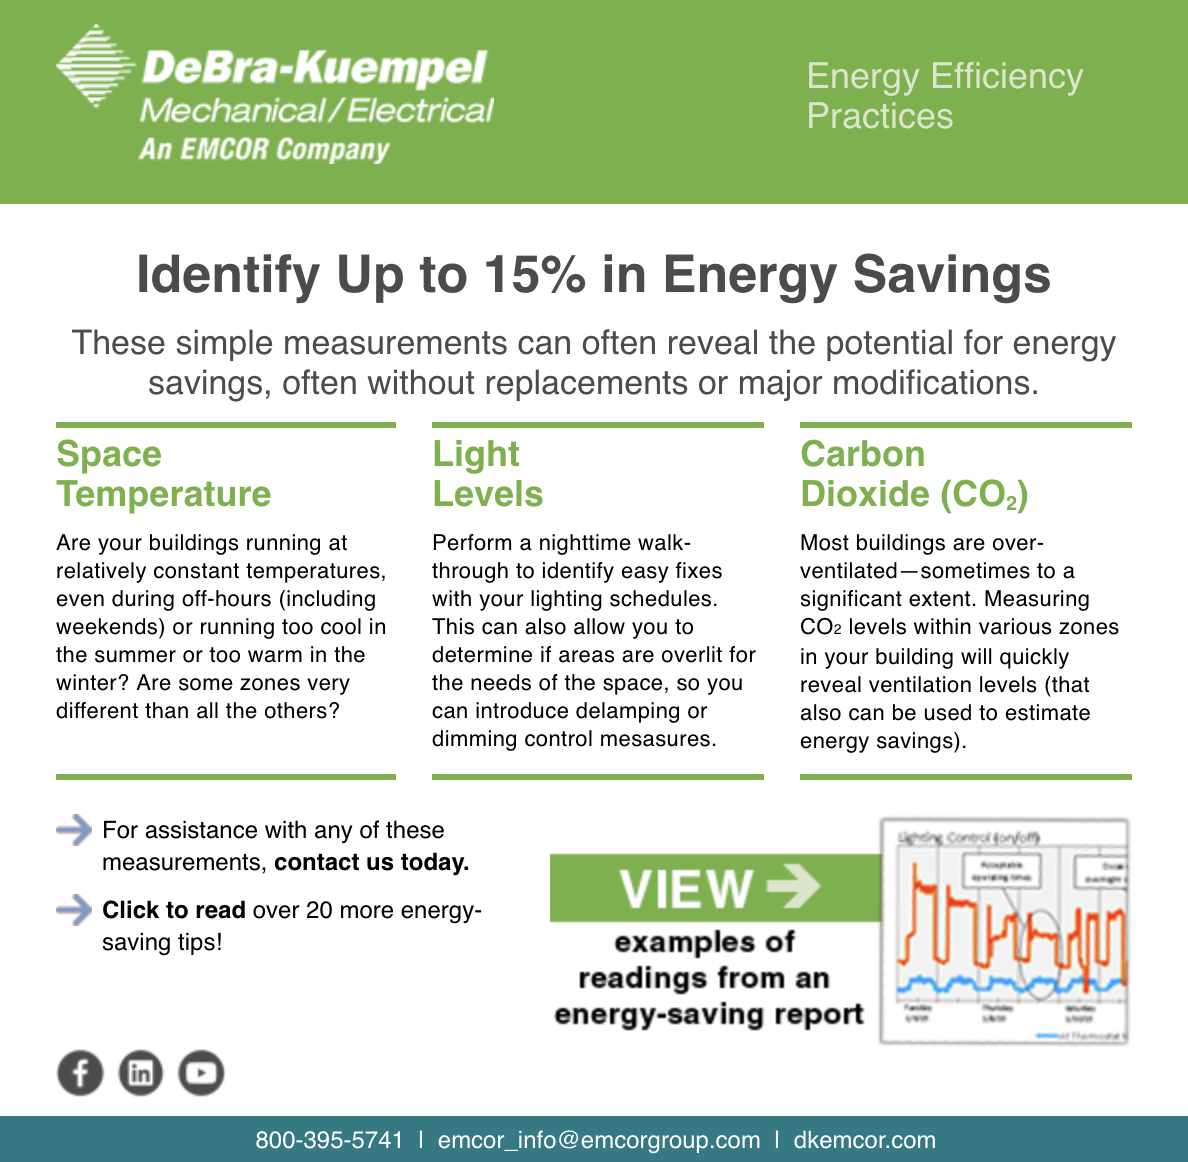 Identify up to 15% in Energy Savings.